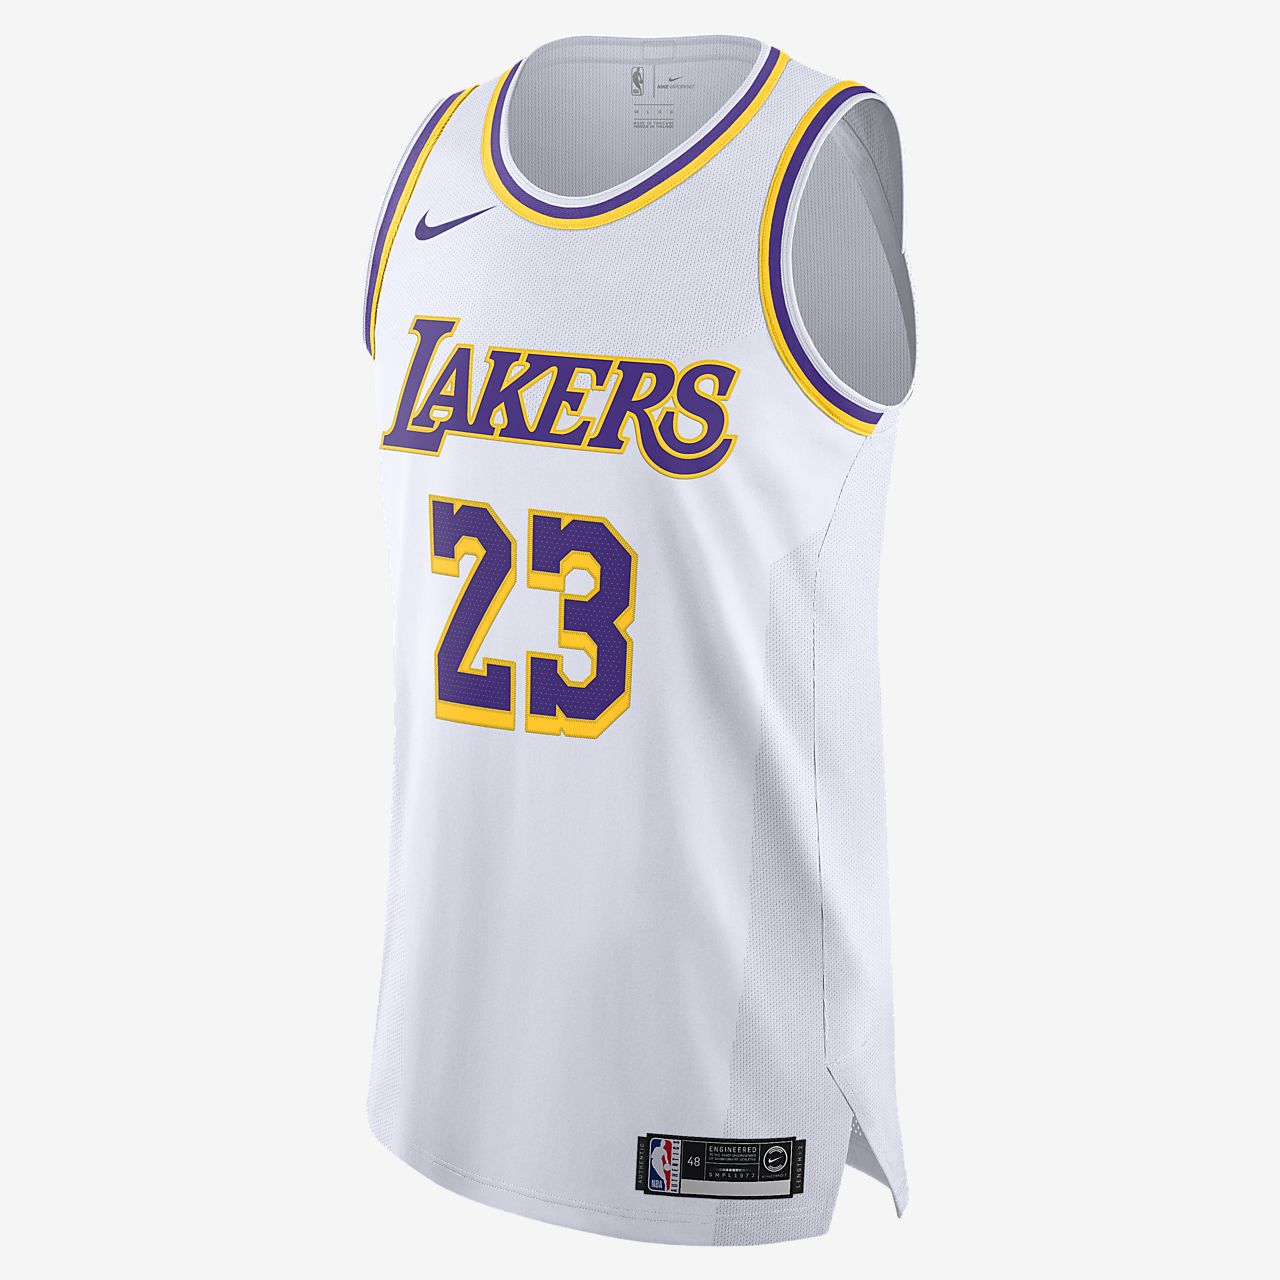 lebron james lakers jersey real